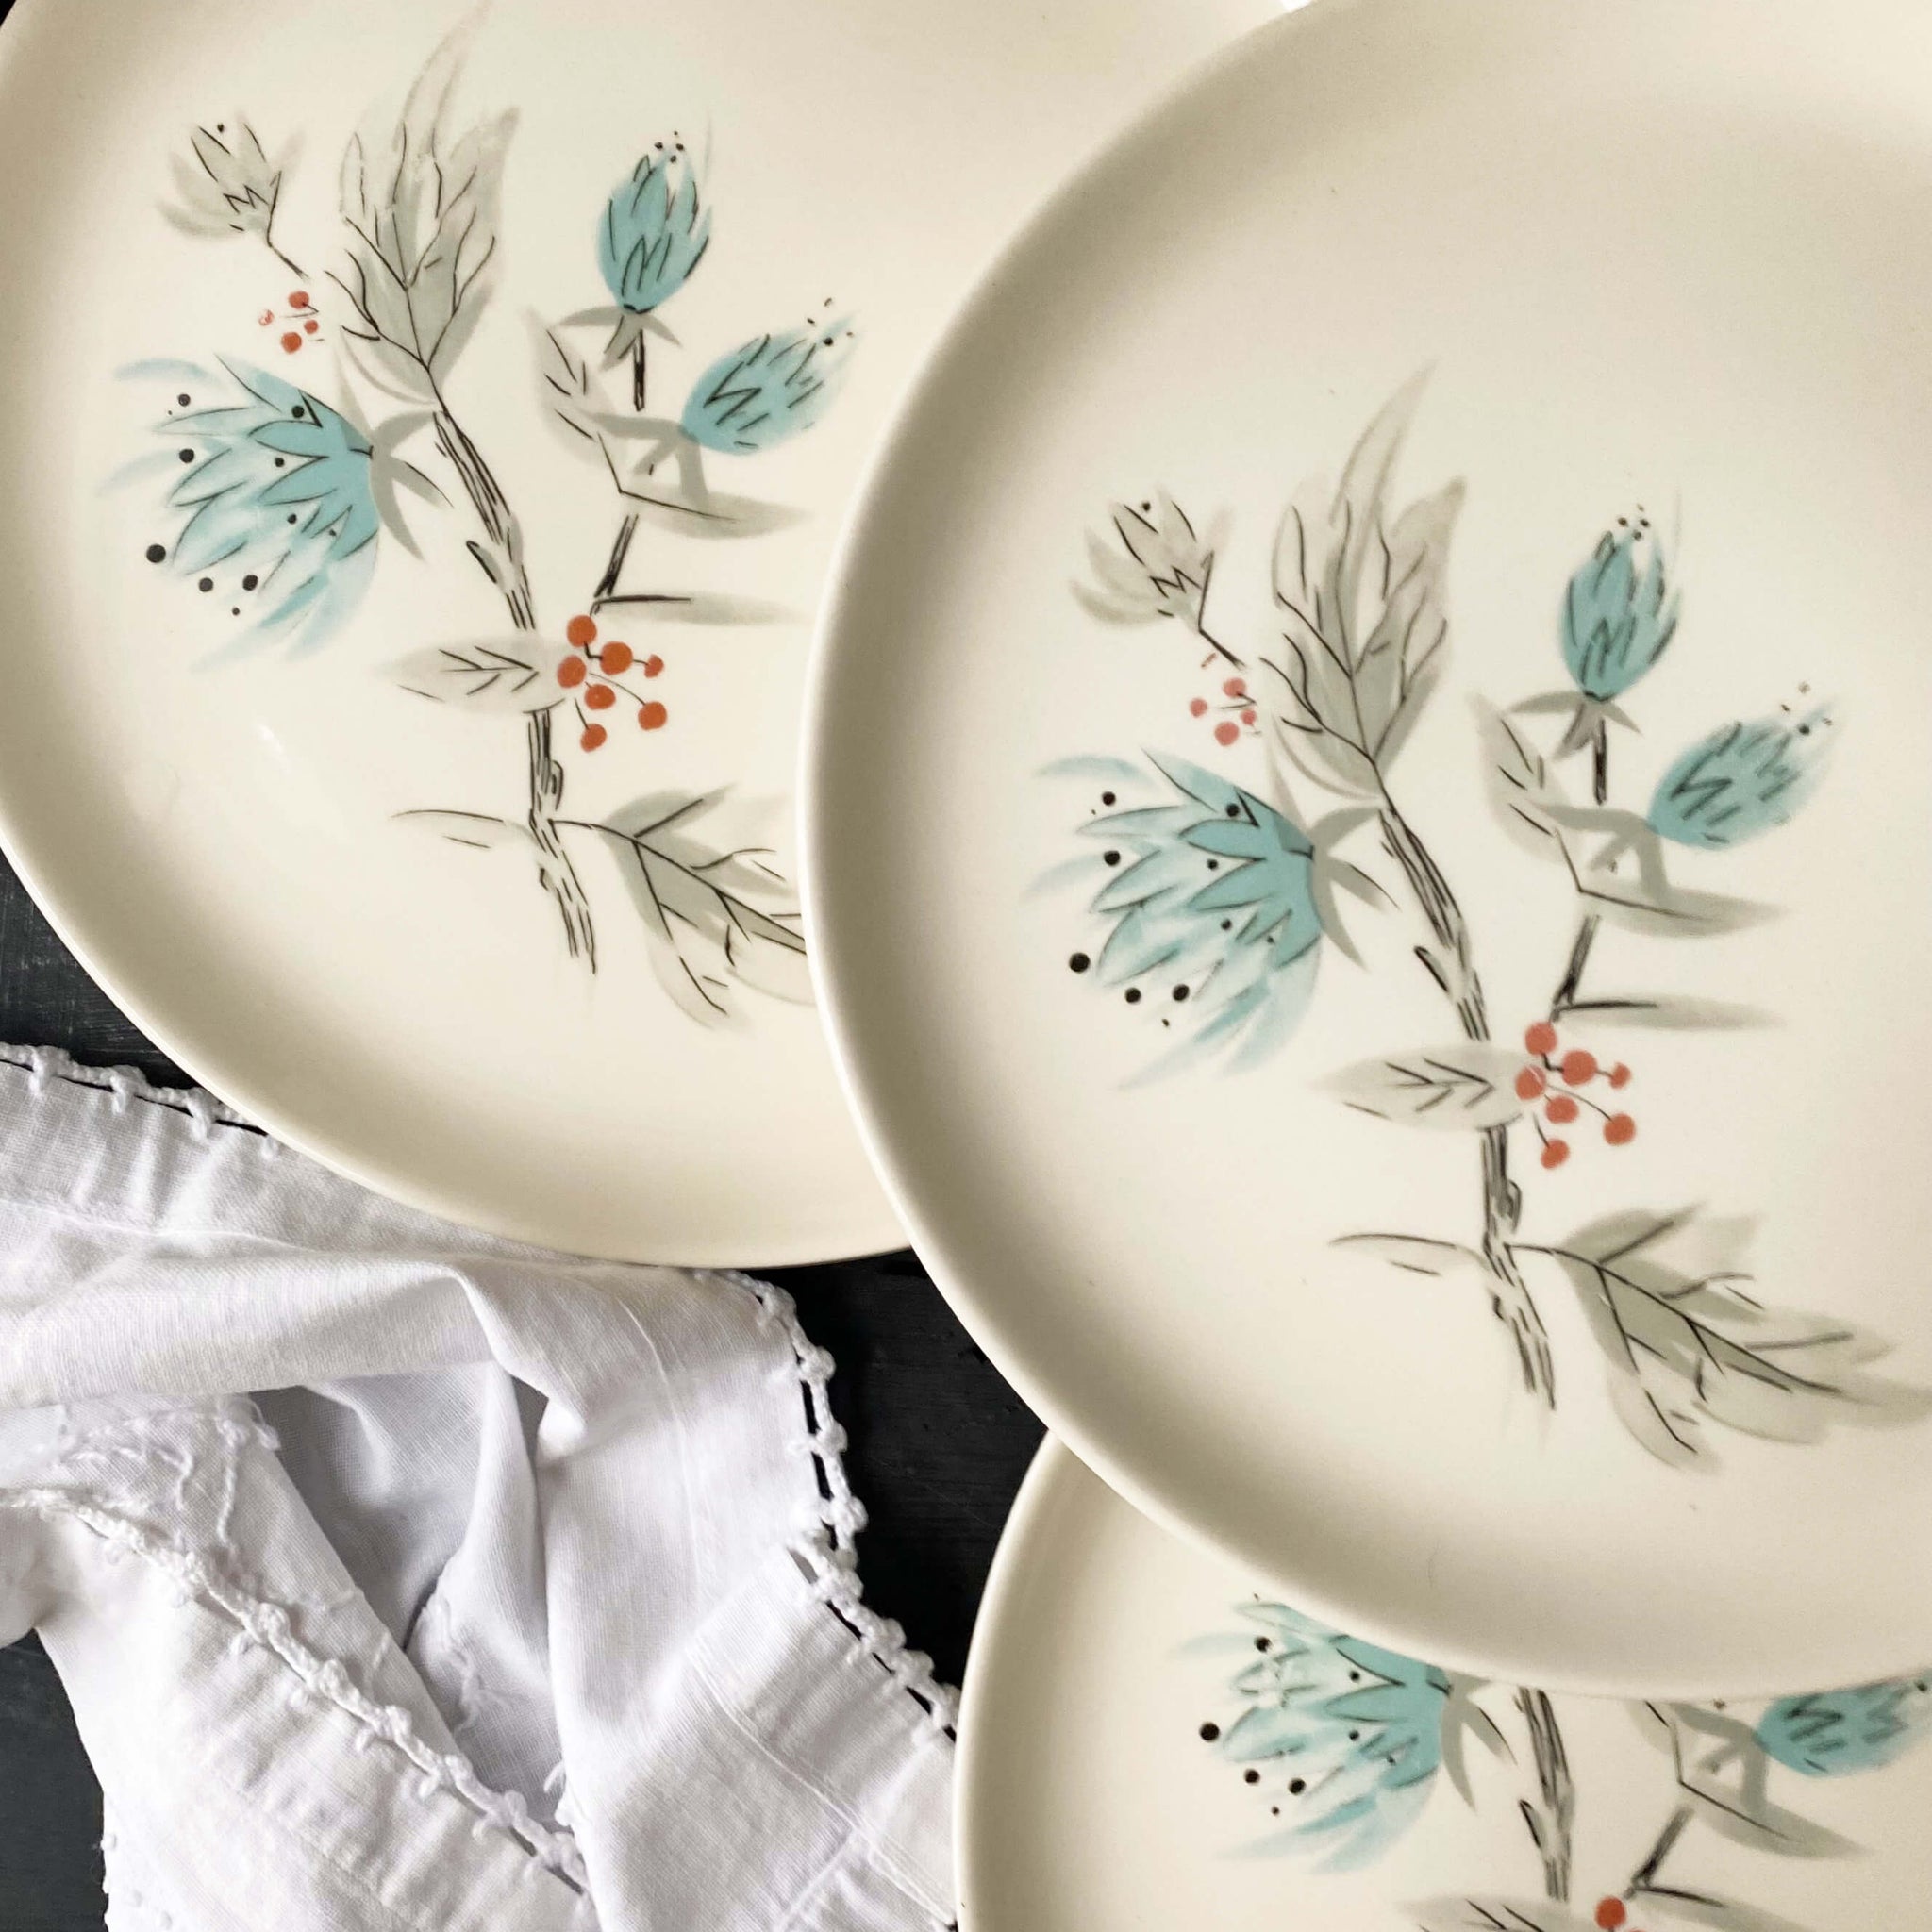 Rare Vintage Midcentury Dinner Plates with Teal Flowers Grey Leaves & Red Berries - Set of Four